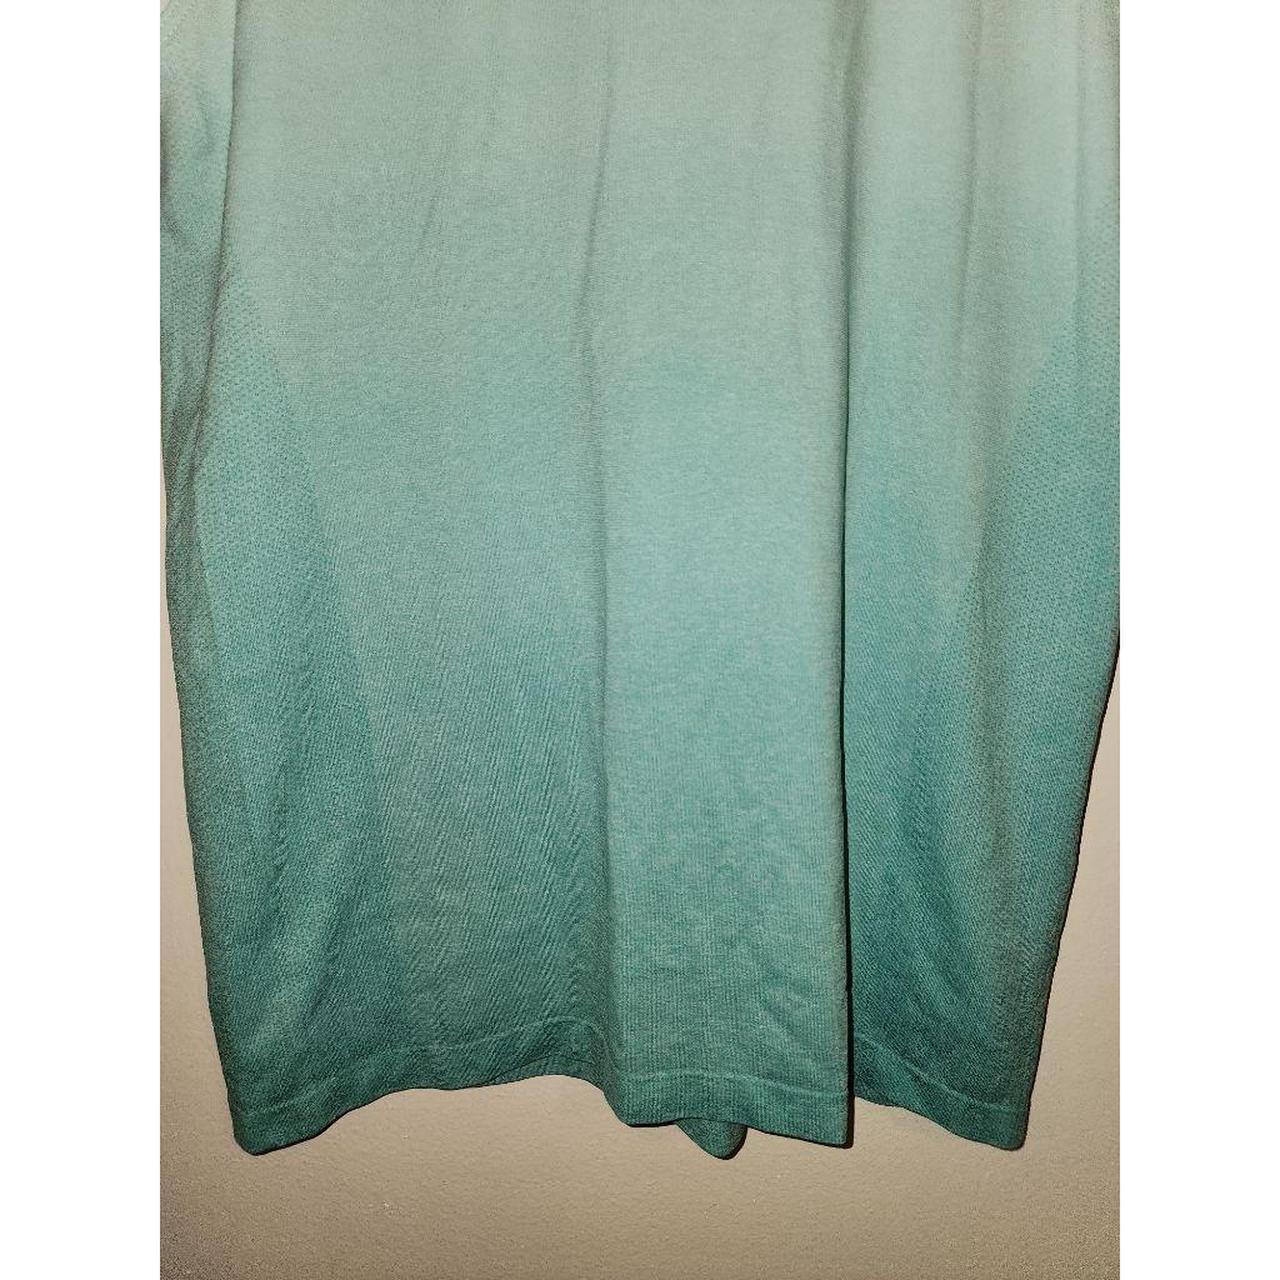 Product Image 3 - Small
Collar tank
Golf Tank
Ombre teal

65% Nylon
35%